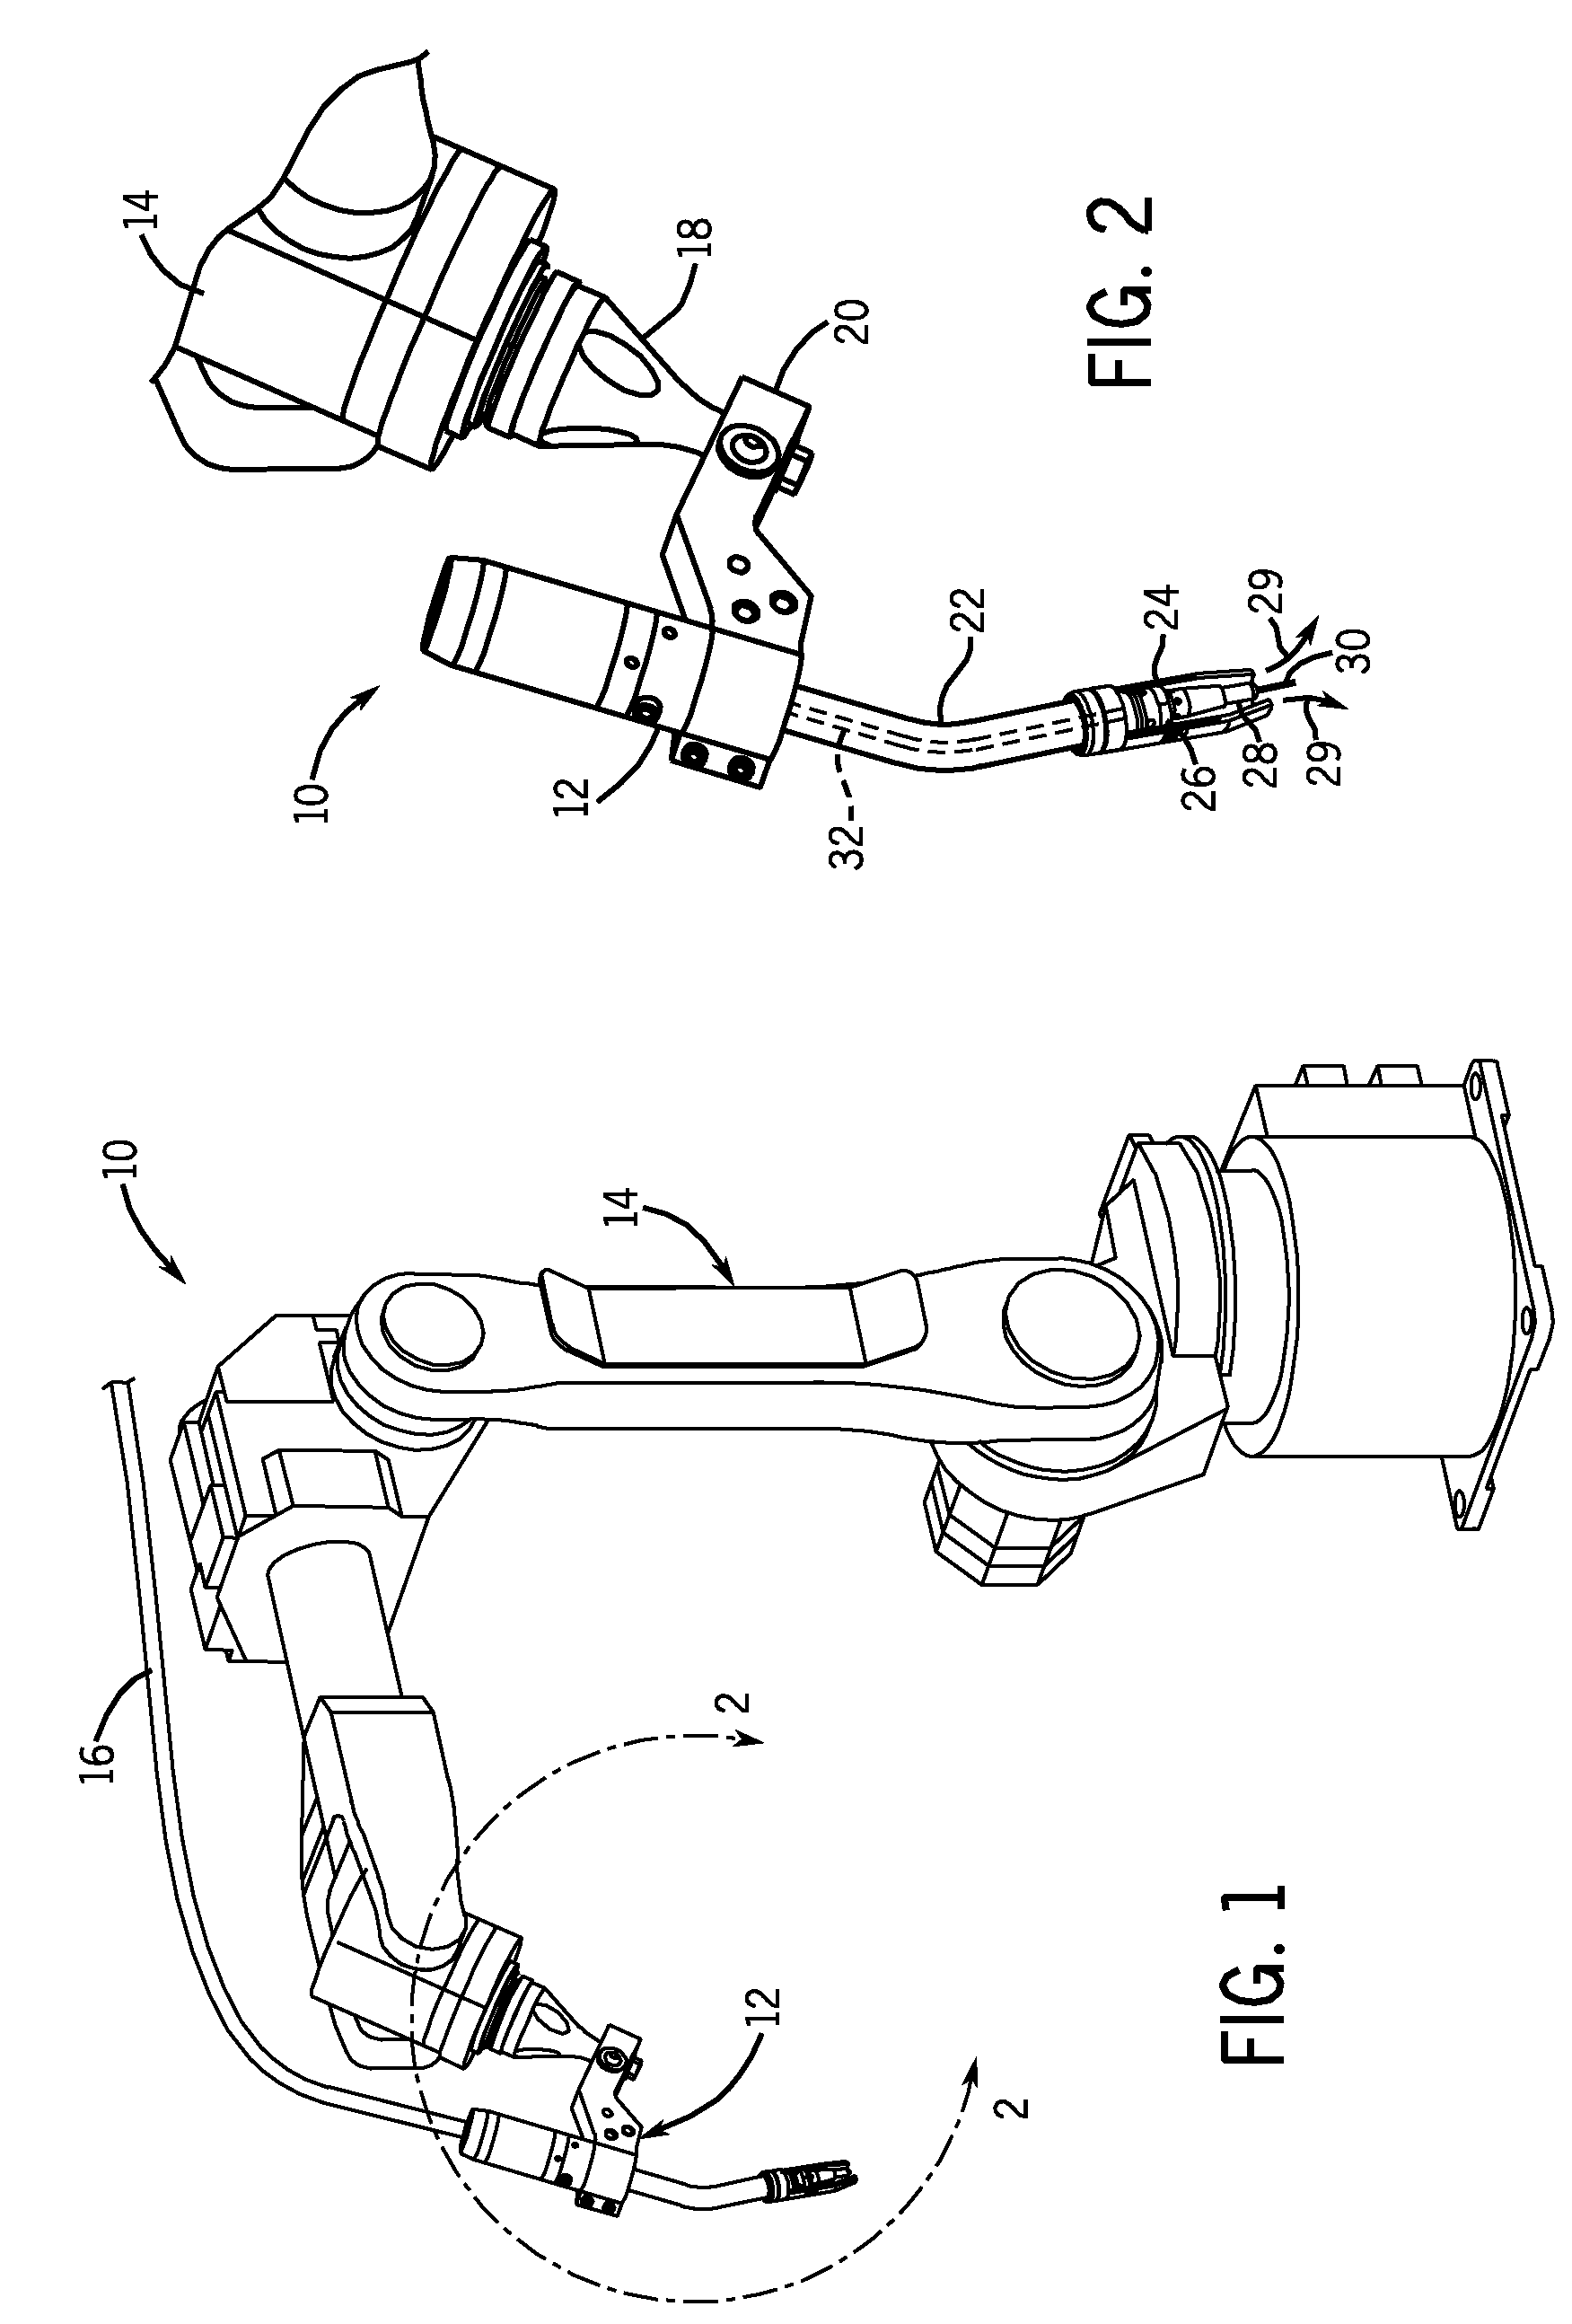 Welding system and method having controlled liner contour and welding wire curvature